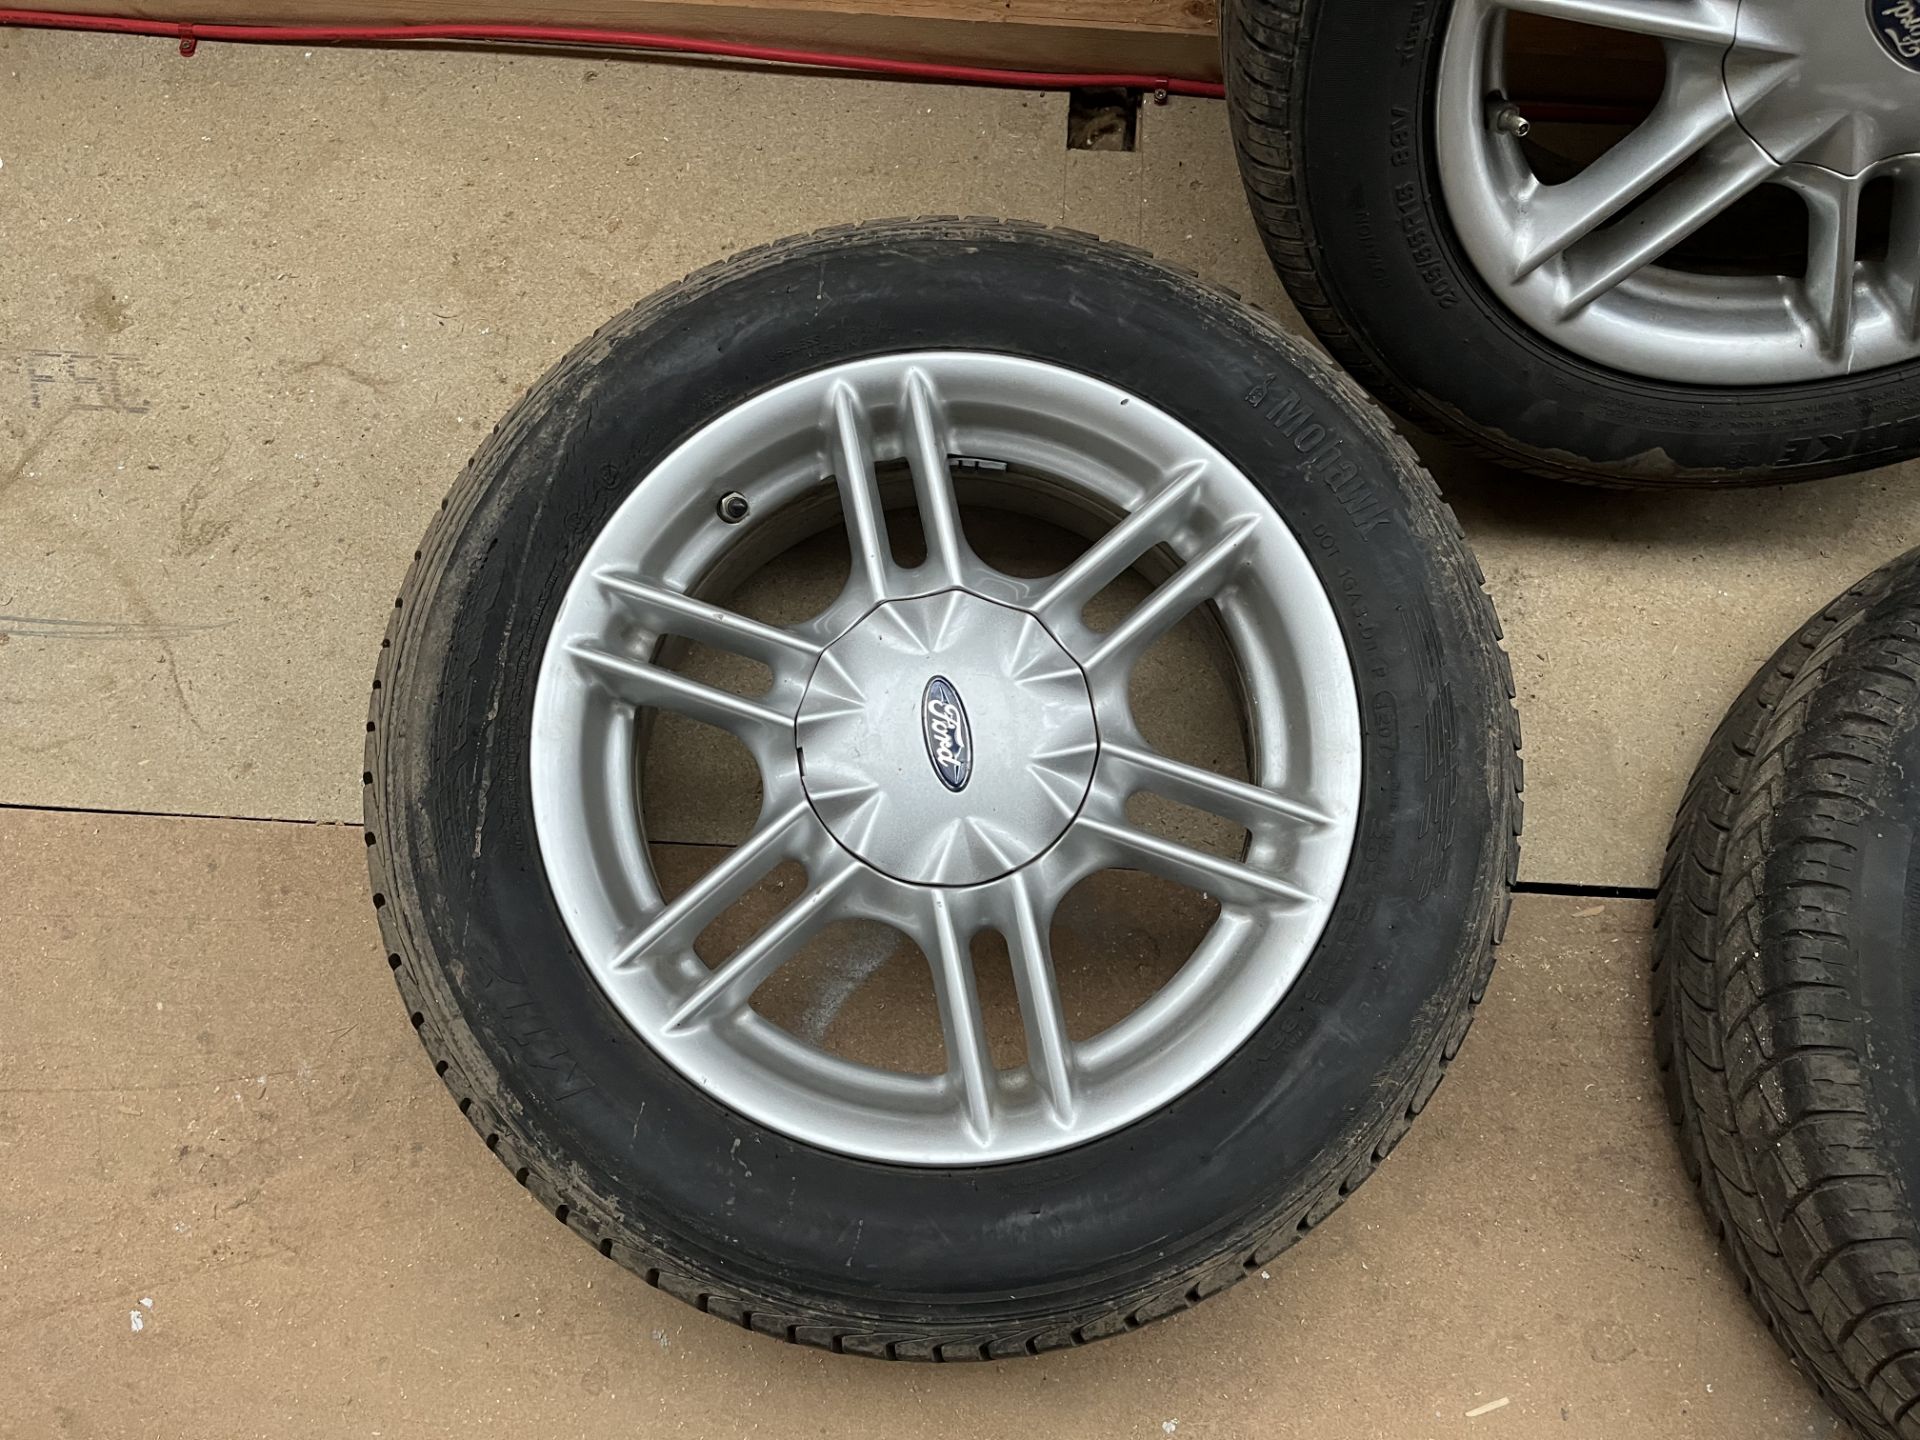 MKII Ford Mondeo Wheels - Image 2 of 5